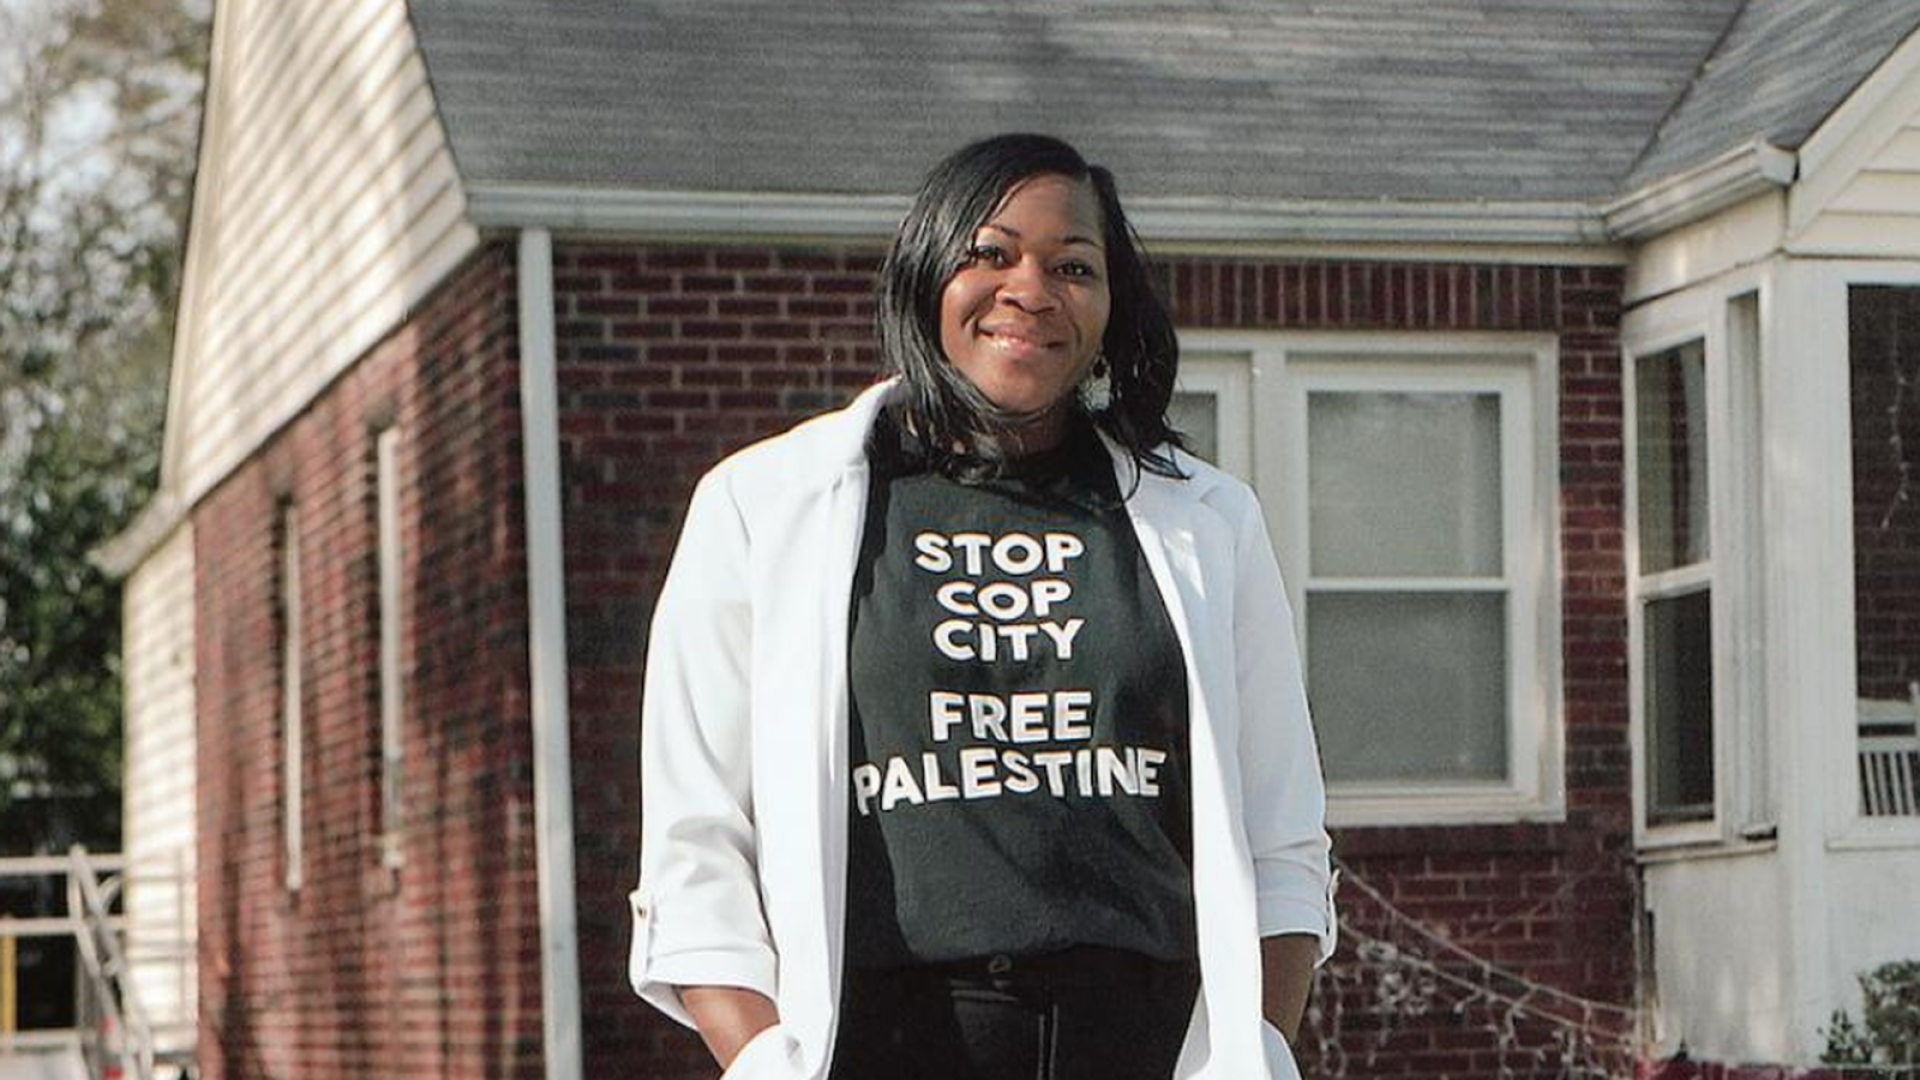 Meet The Black Pastor Advocating For Justice, From East Atlanta To Palestine